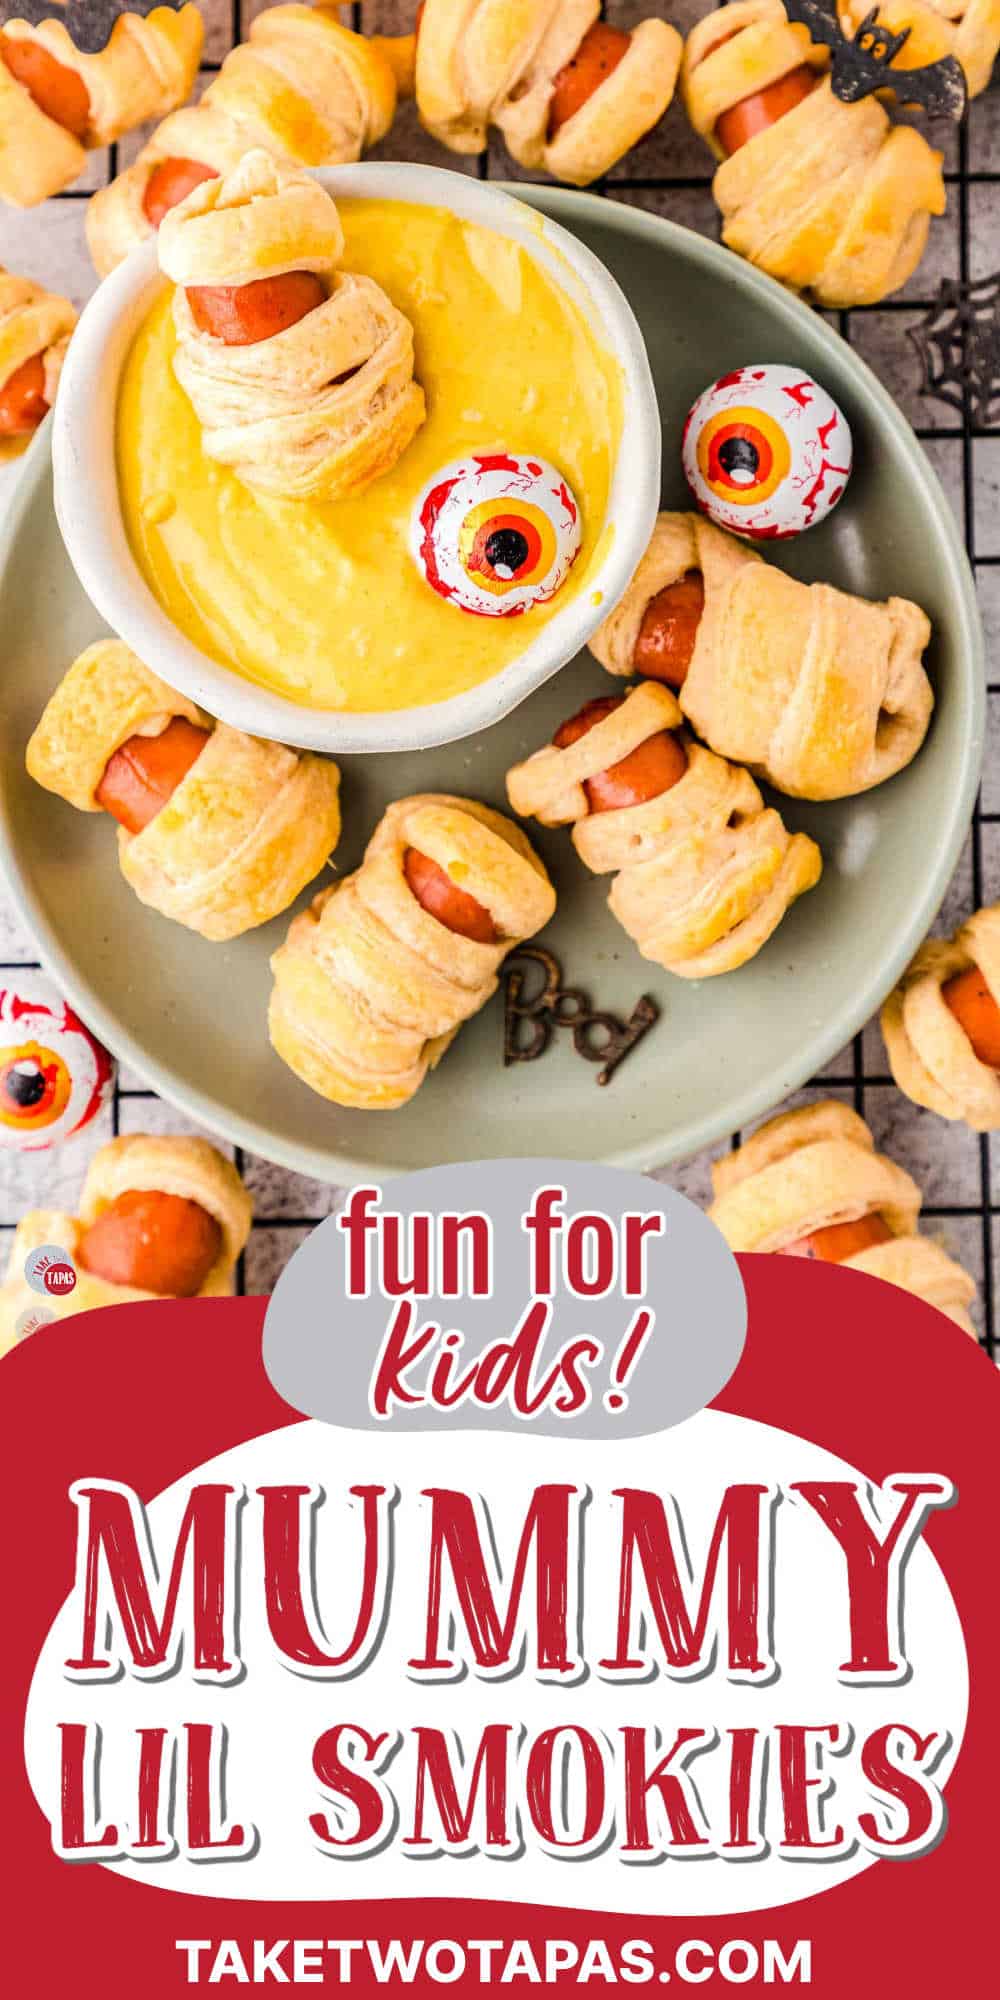 bowl of halloween appetizers with red banner and text